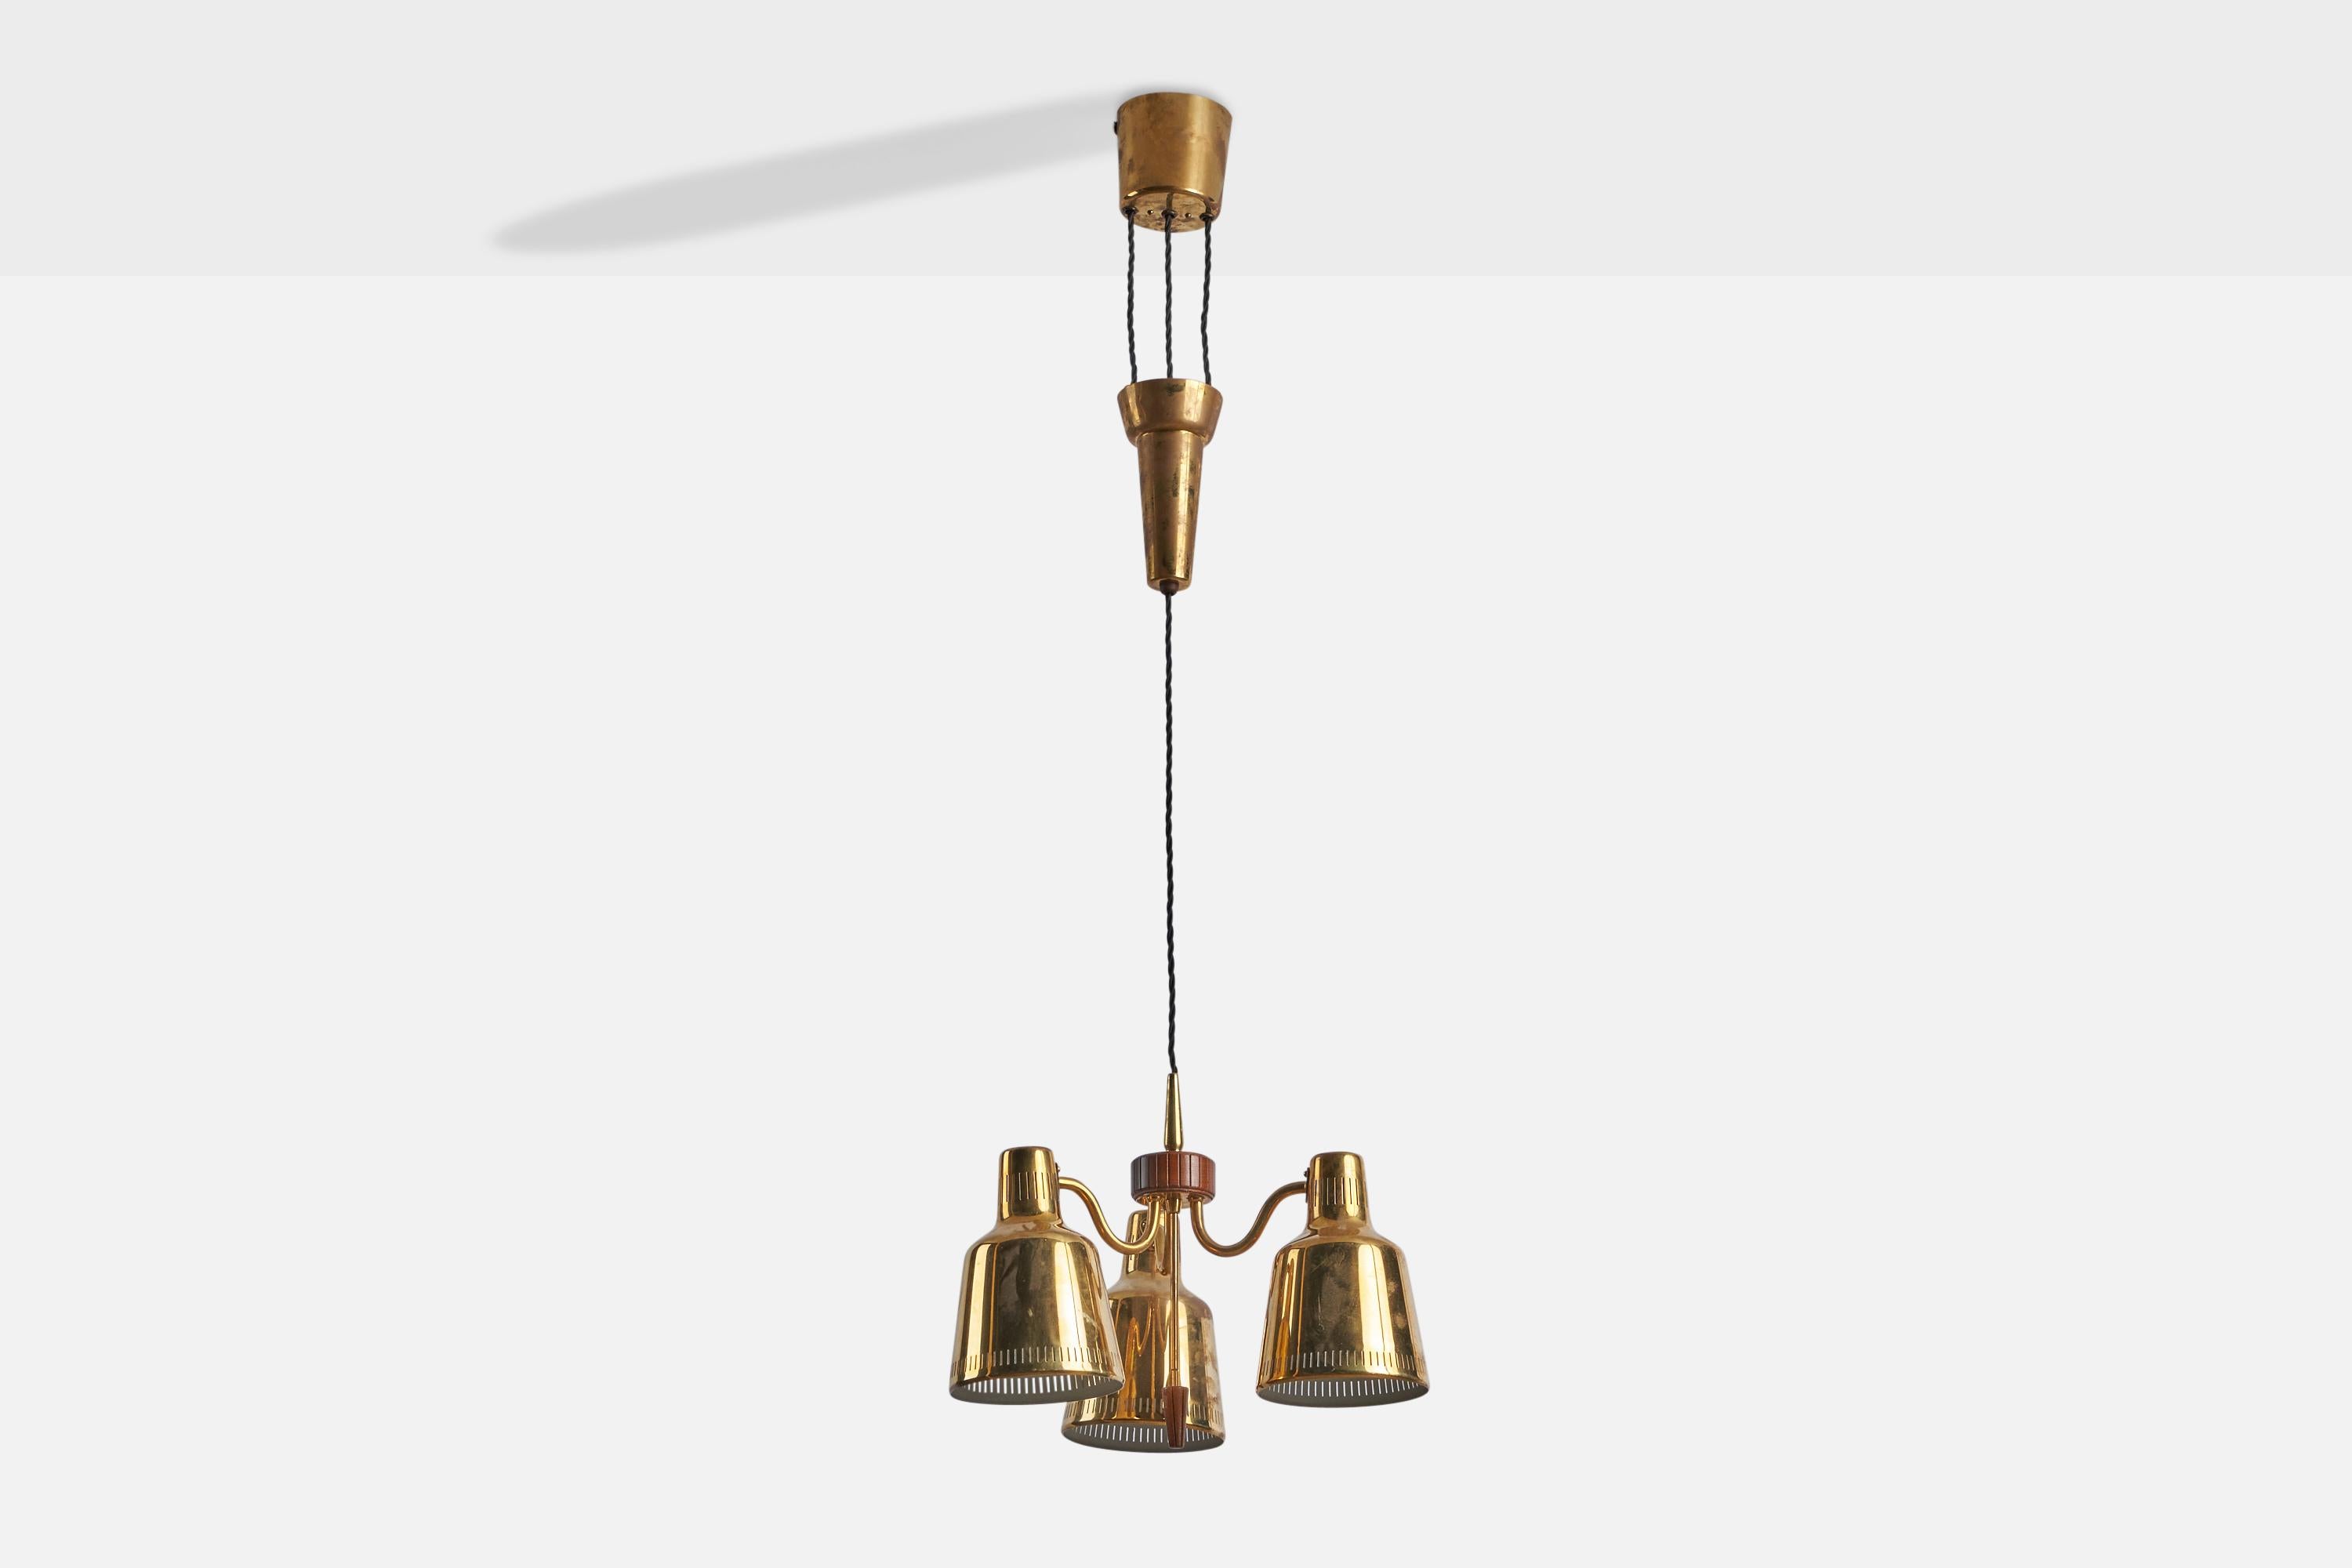 A brass chandelier attributed to Bröderna Malmström Metallvarufabrik, Sweden, 1940s.

Overall Dimensions (inches): 41” H x 14” Diameter 
Bulb Specifications: E-26 Bulb
Number of Sockets: 3